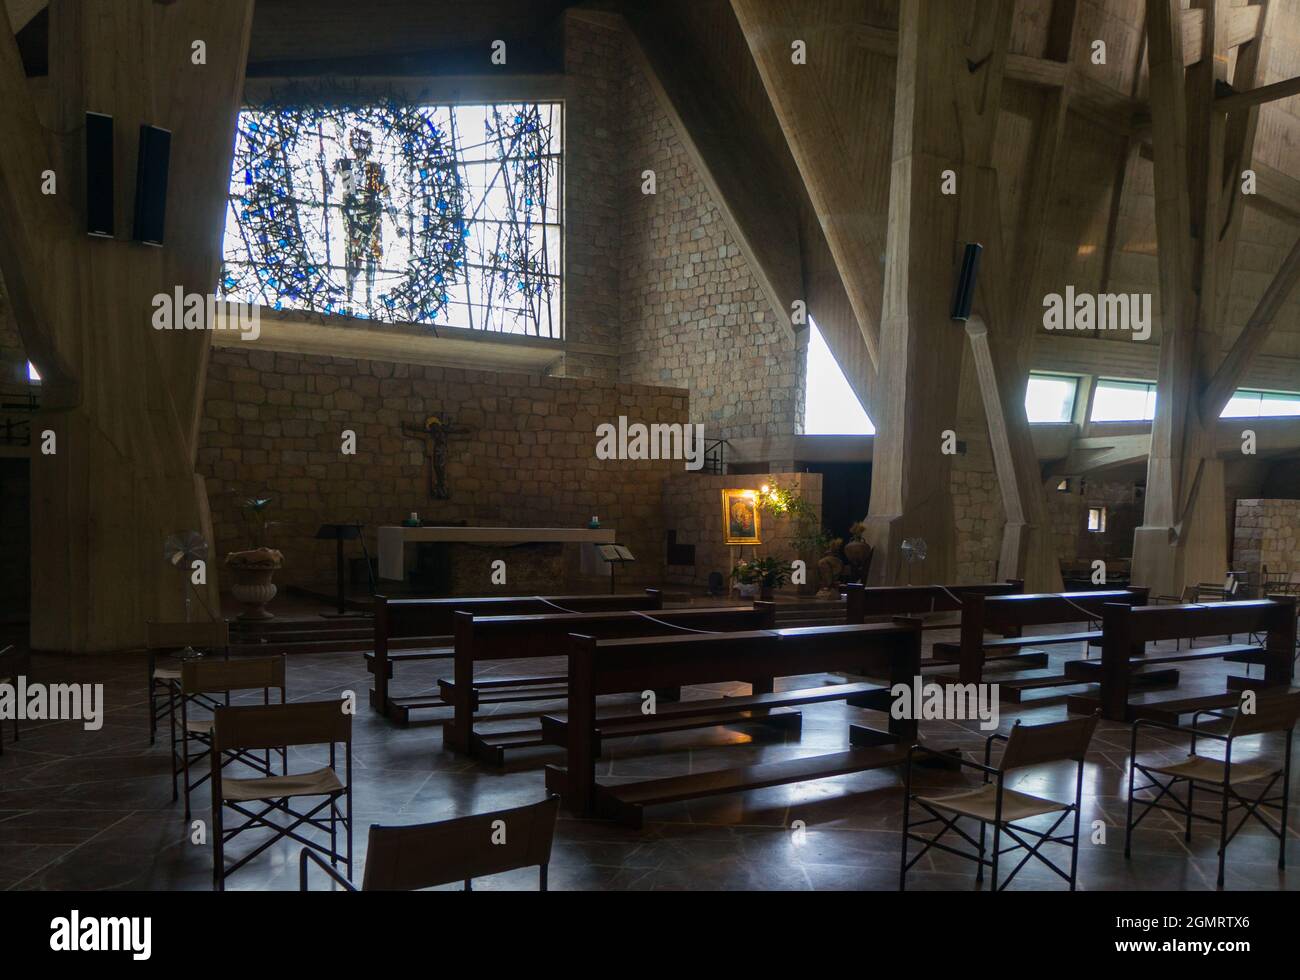 Florence, Italy (15th September 2021) - Inside the church of San Giovanni Battista (St. John Baptist) built in 1964 between two motorways Stock Photo